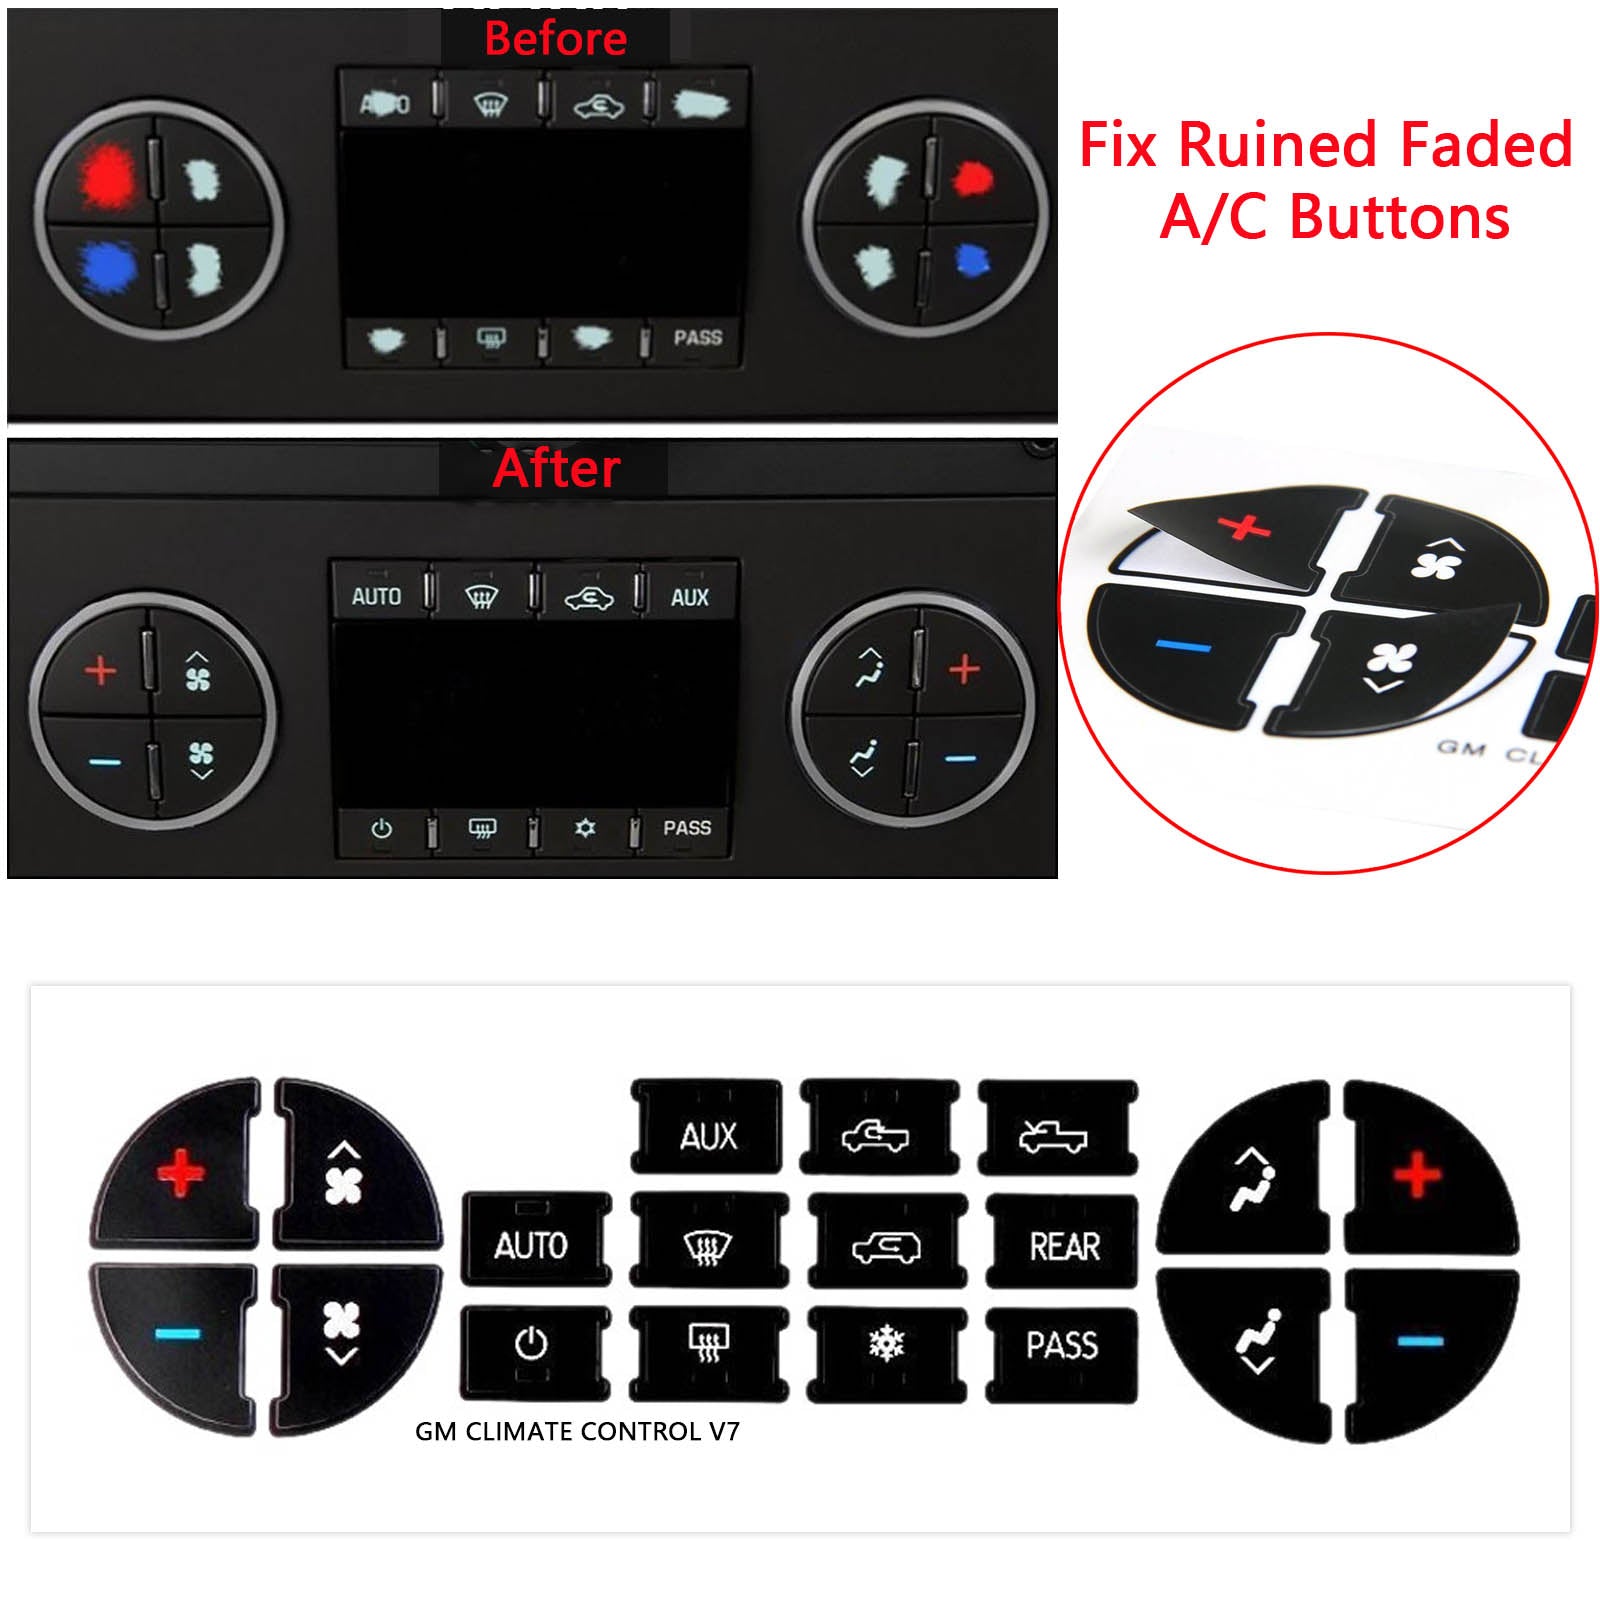 AC/Radio Dash Button Repair Kit, Fixing Ruined Faded Buttons